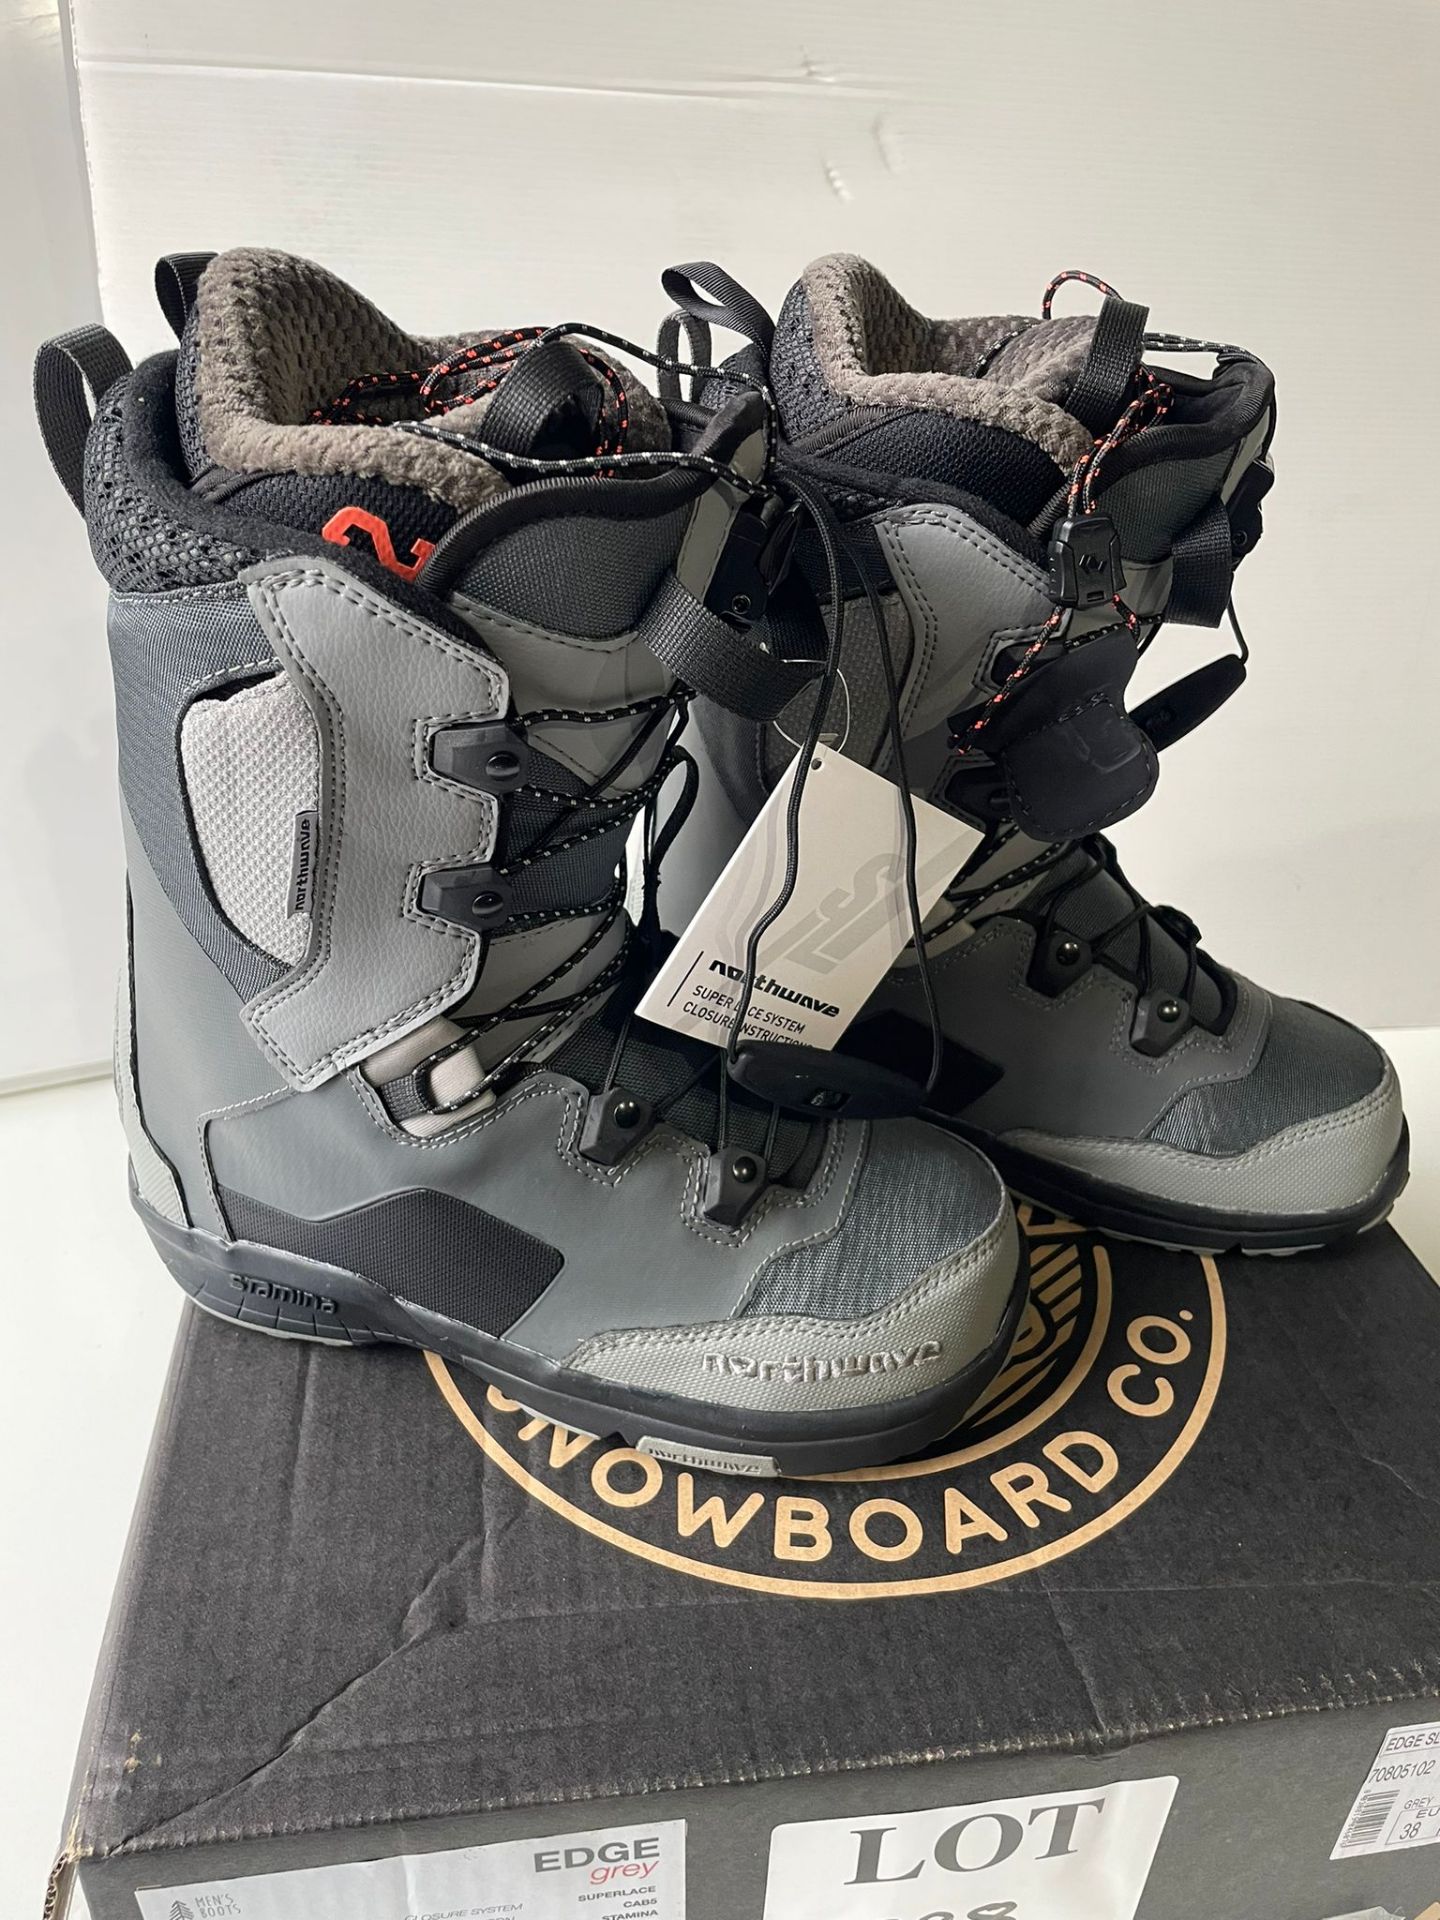 Northwave snow boots, UK size 38